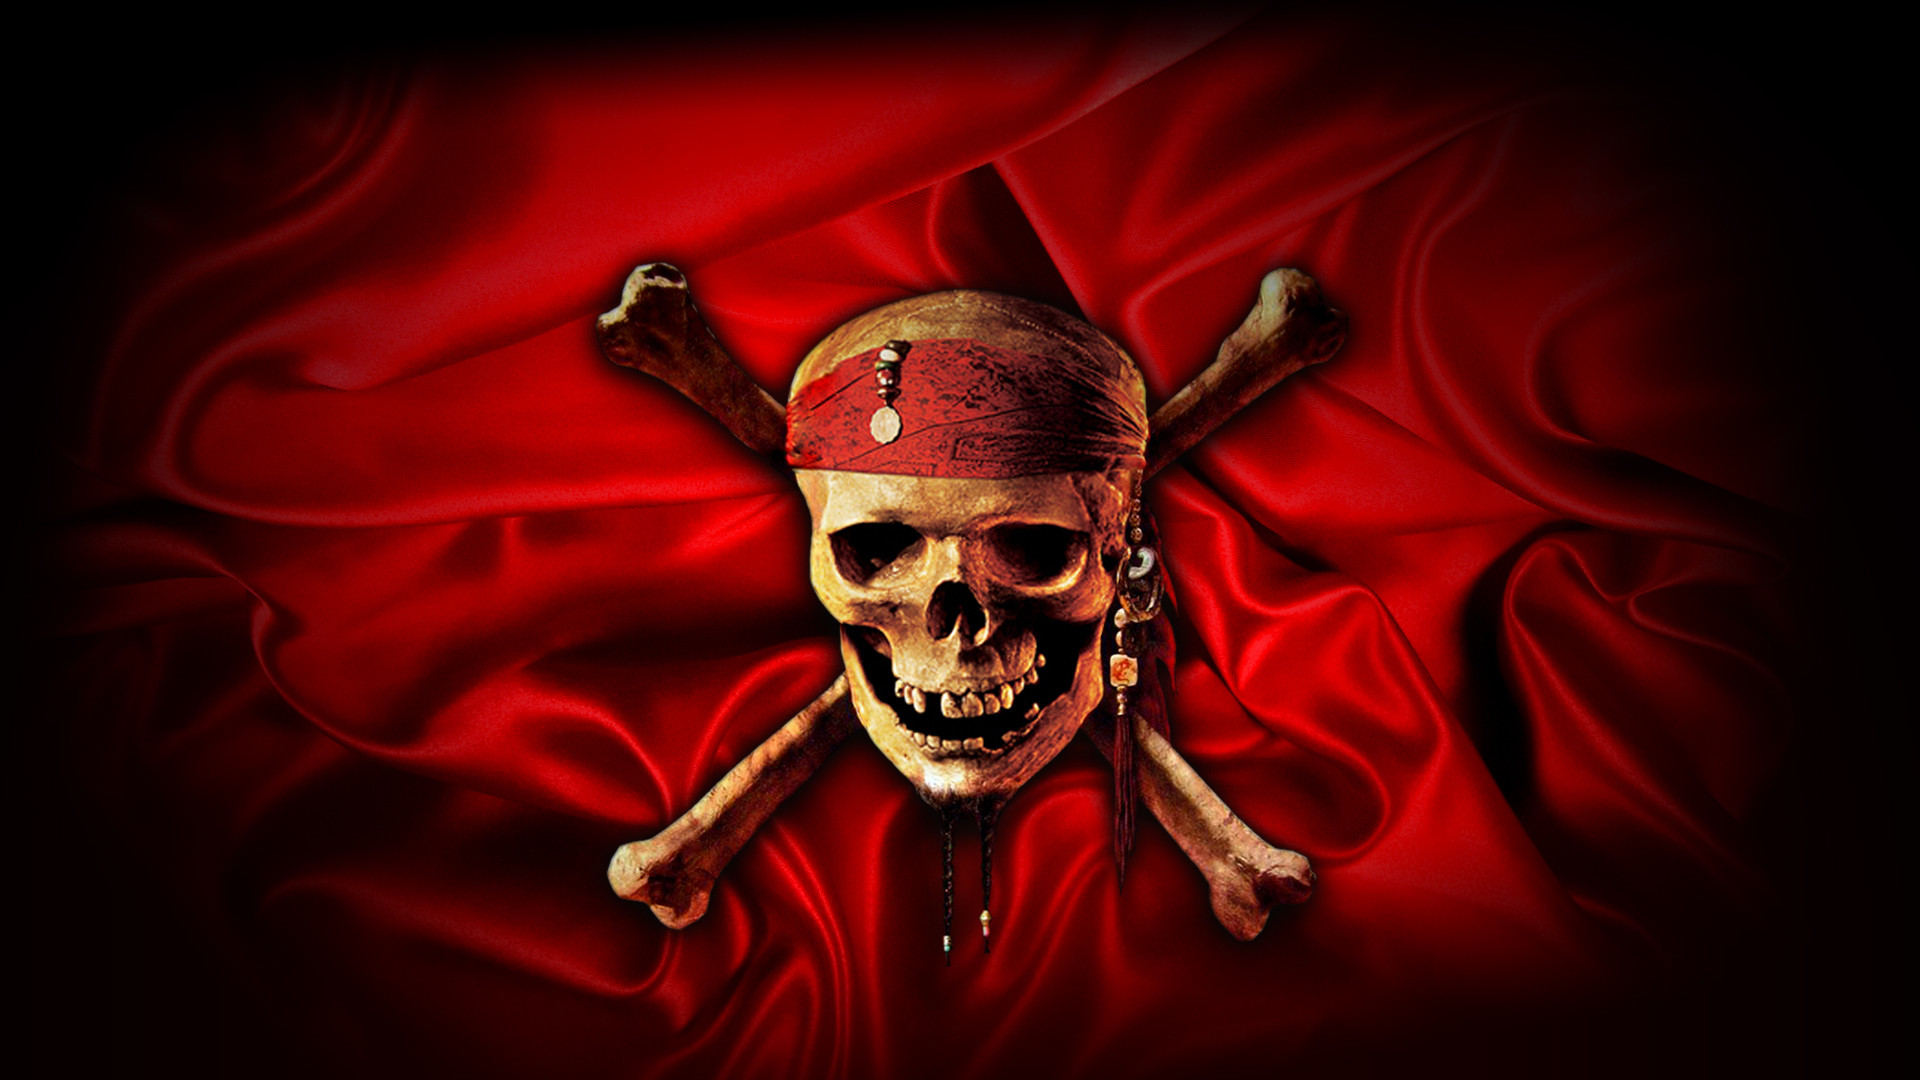 1920x1080 Movie Pirates Of The Caribbean: At World's End Skull Crossbones Wallpaper